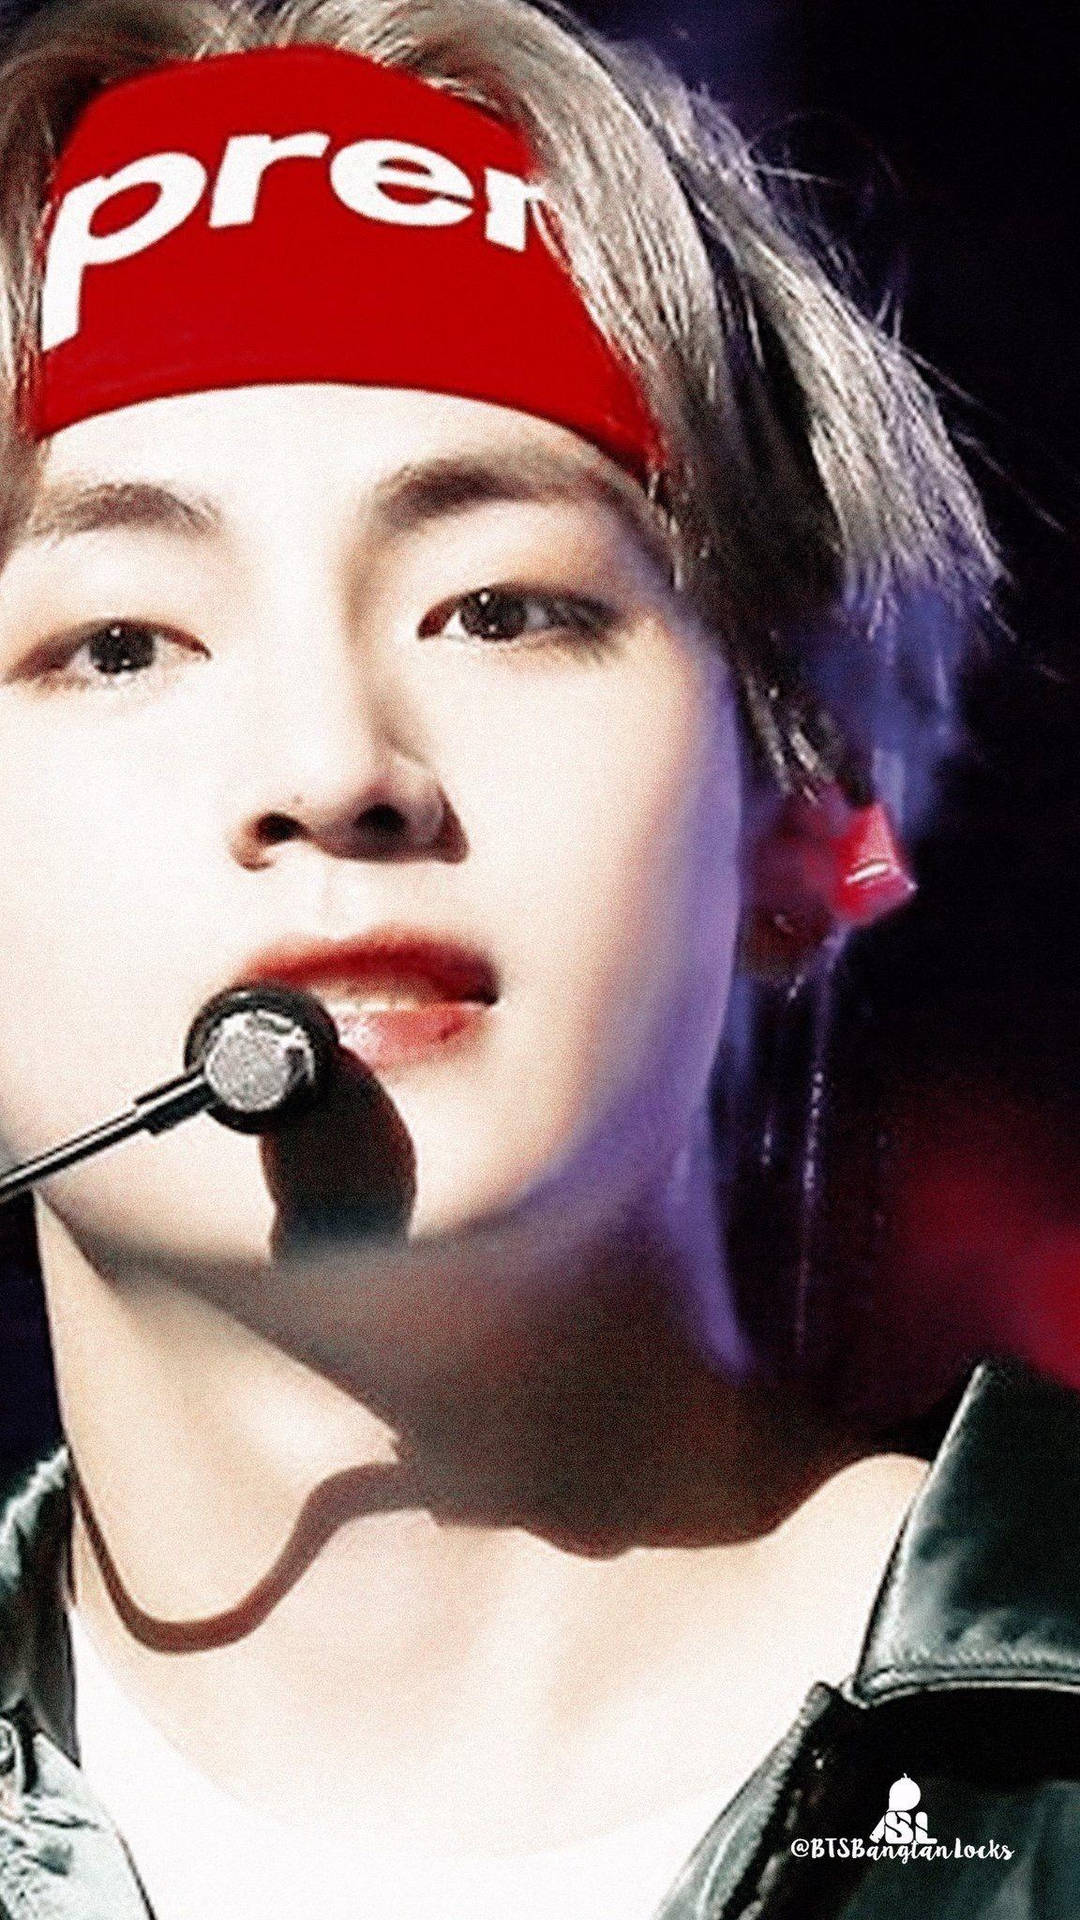 Taehyung Cute With Red Bandana Background